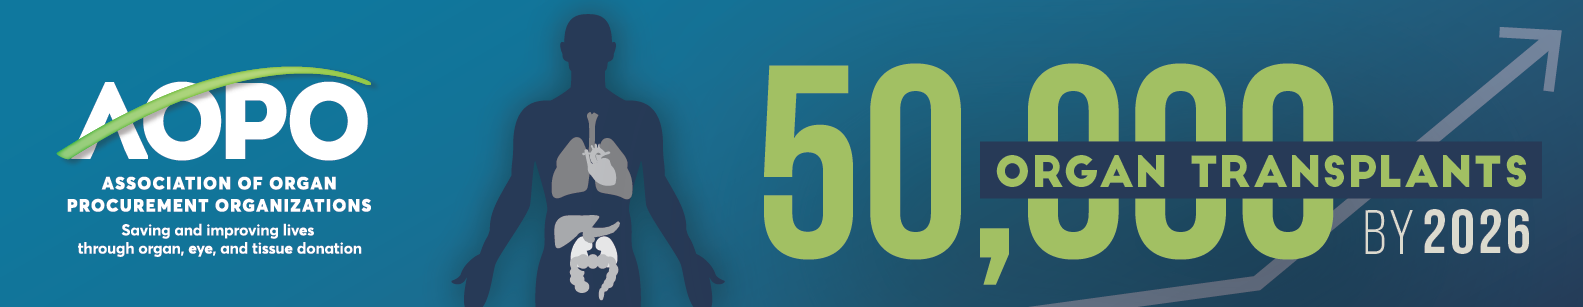 AOPO Announces 50,000 Organ Transplants by 2026 Campaign that Focuses on Improving System and Saving More Lives